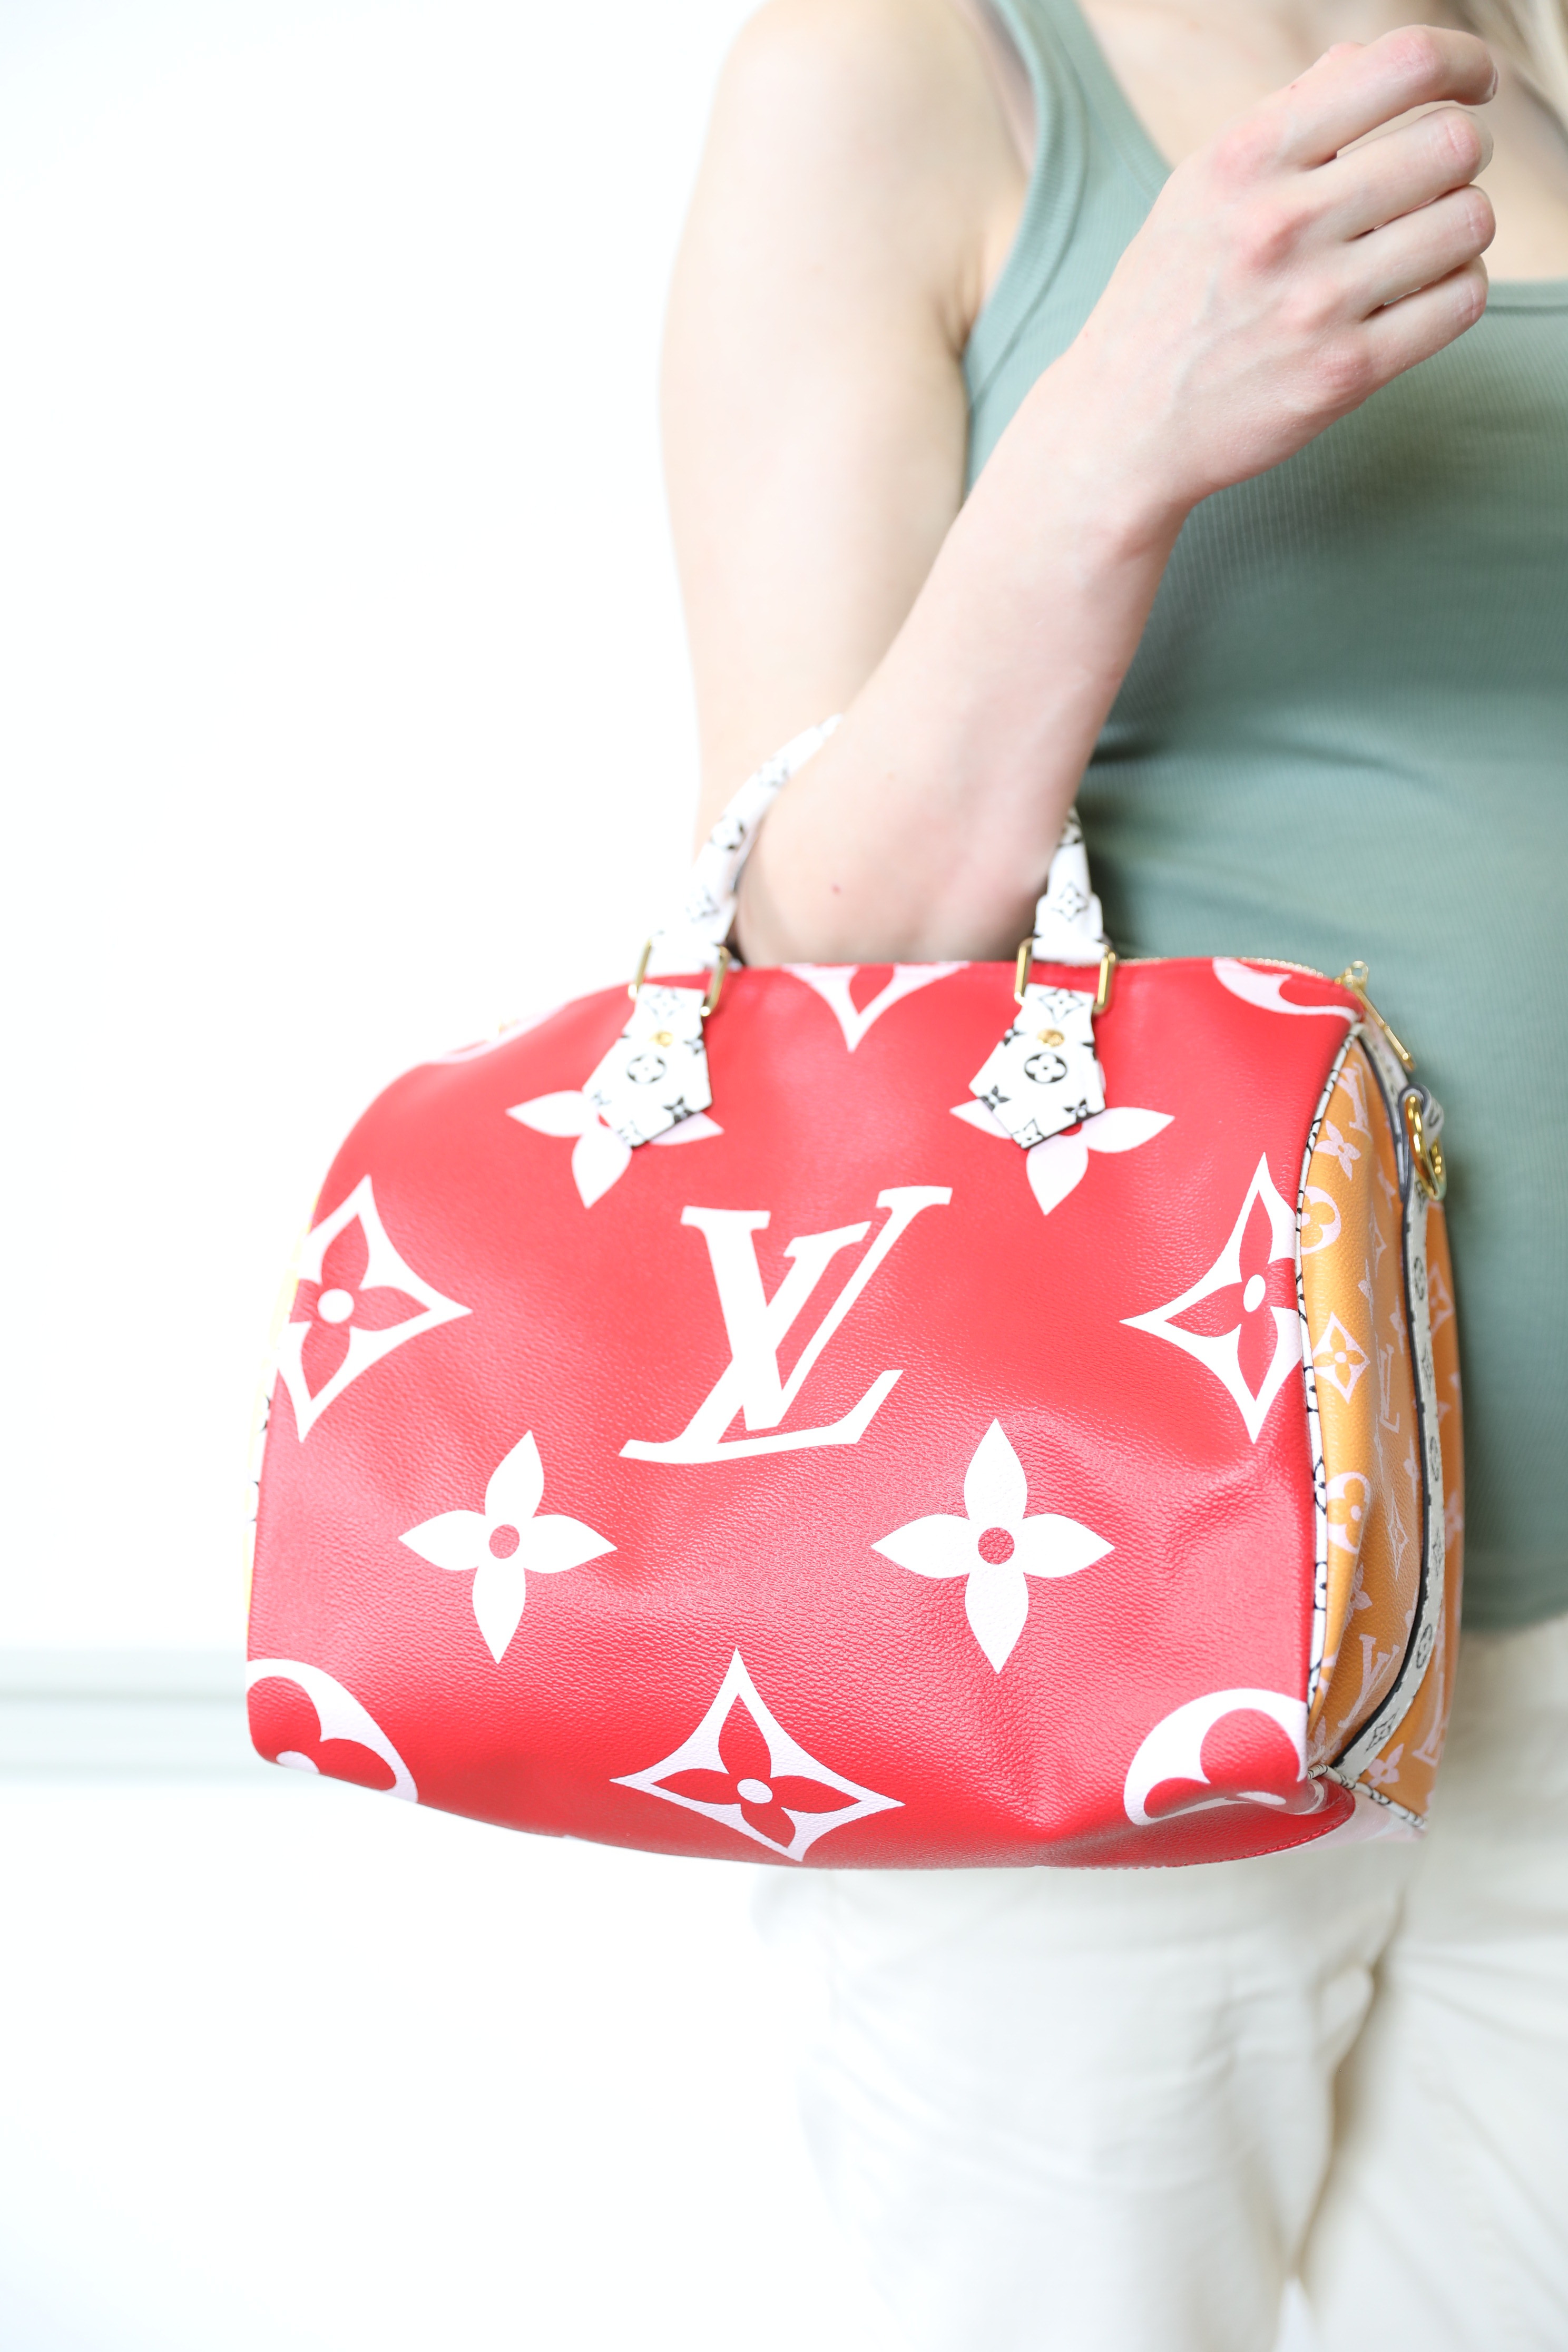 Louis Vuitton Speedy Bandouliere Monogram Giant 30 Red/Pink in